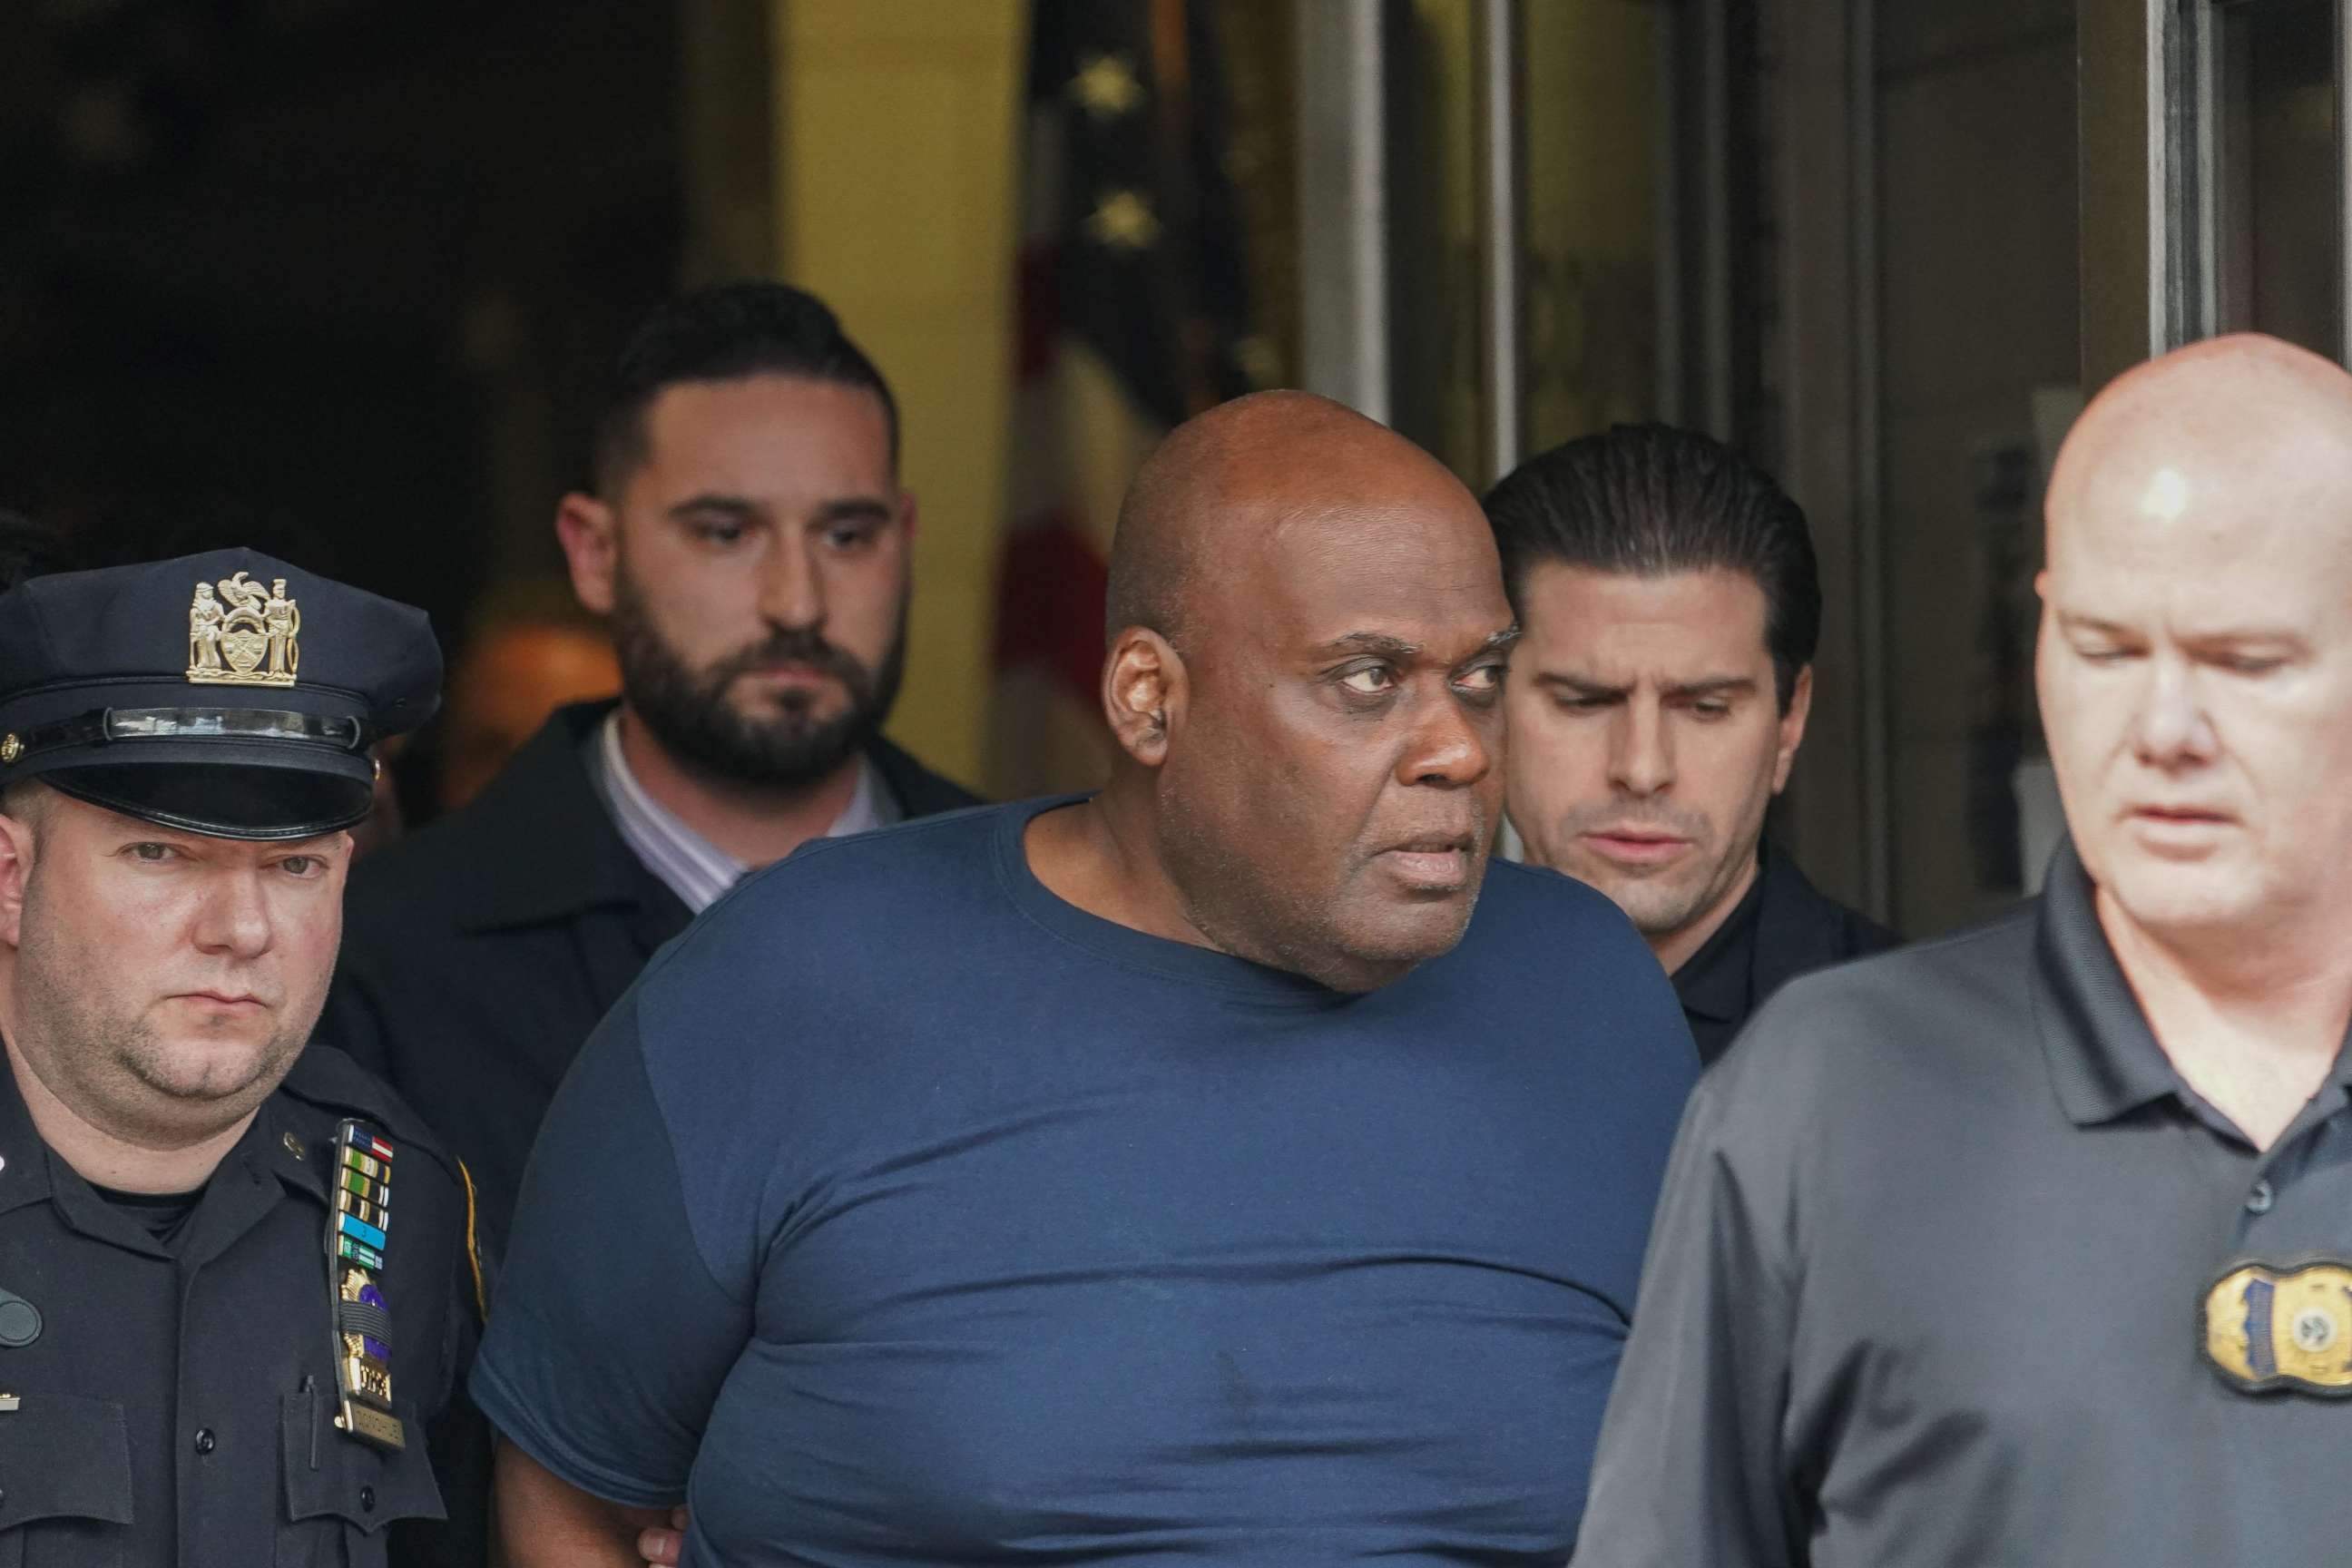 PHOTO: In this file photo taken on April 13, 2022, Frank James, 62, is led away from the 9th Precinct into Federal Custody in New York City after he was arrested on the Lower East Side in Manhattan by two patrol officers.